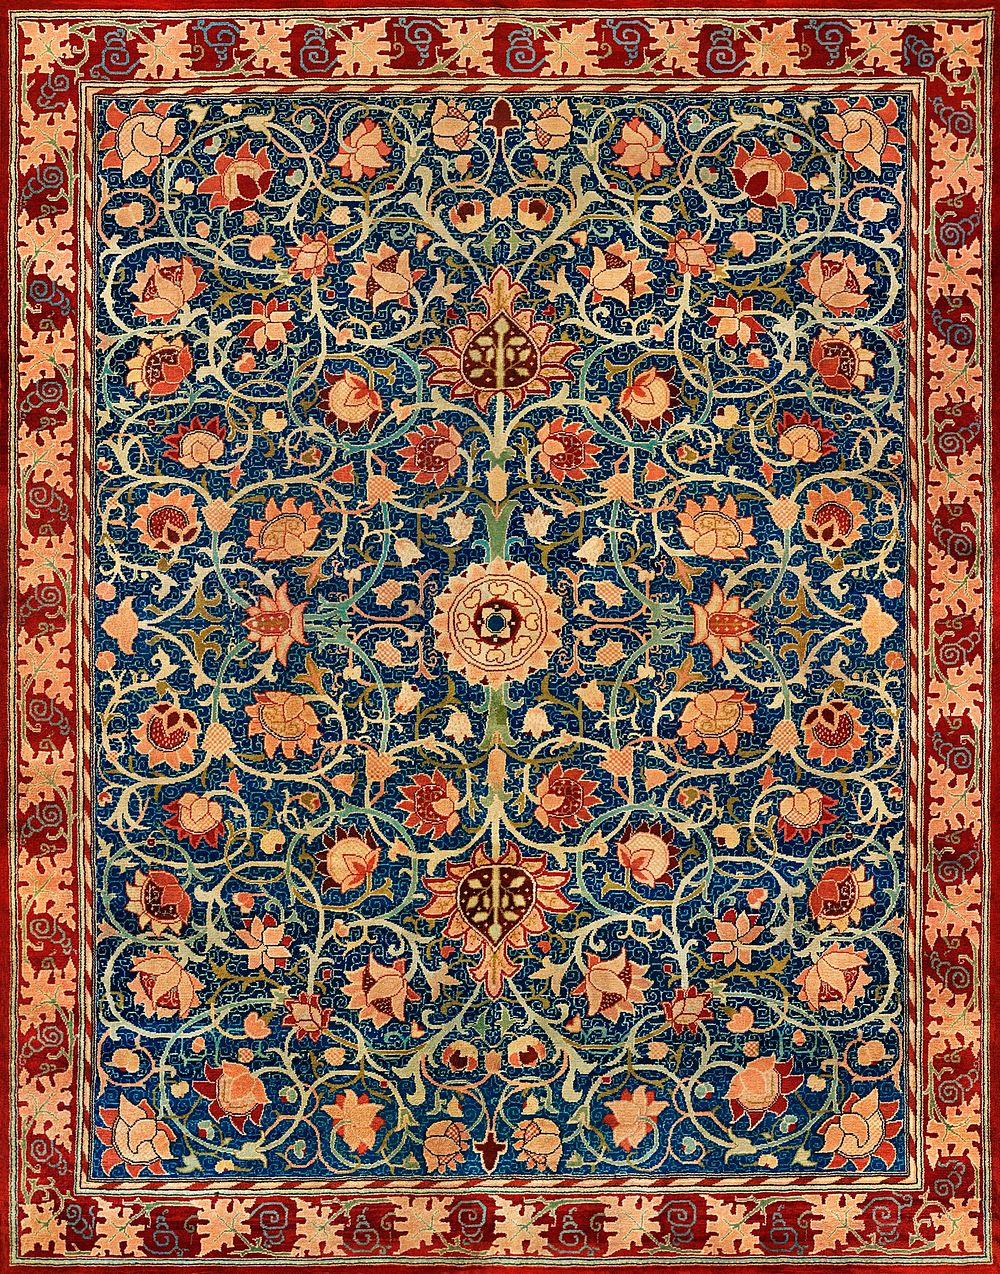 William Morris's Holland Park Carpet (1834-1896). Famous pattern original from The MET Museum. Digitally enhanced by…